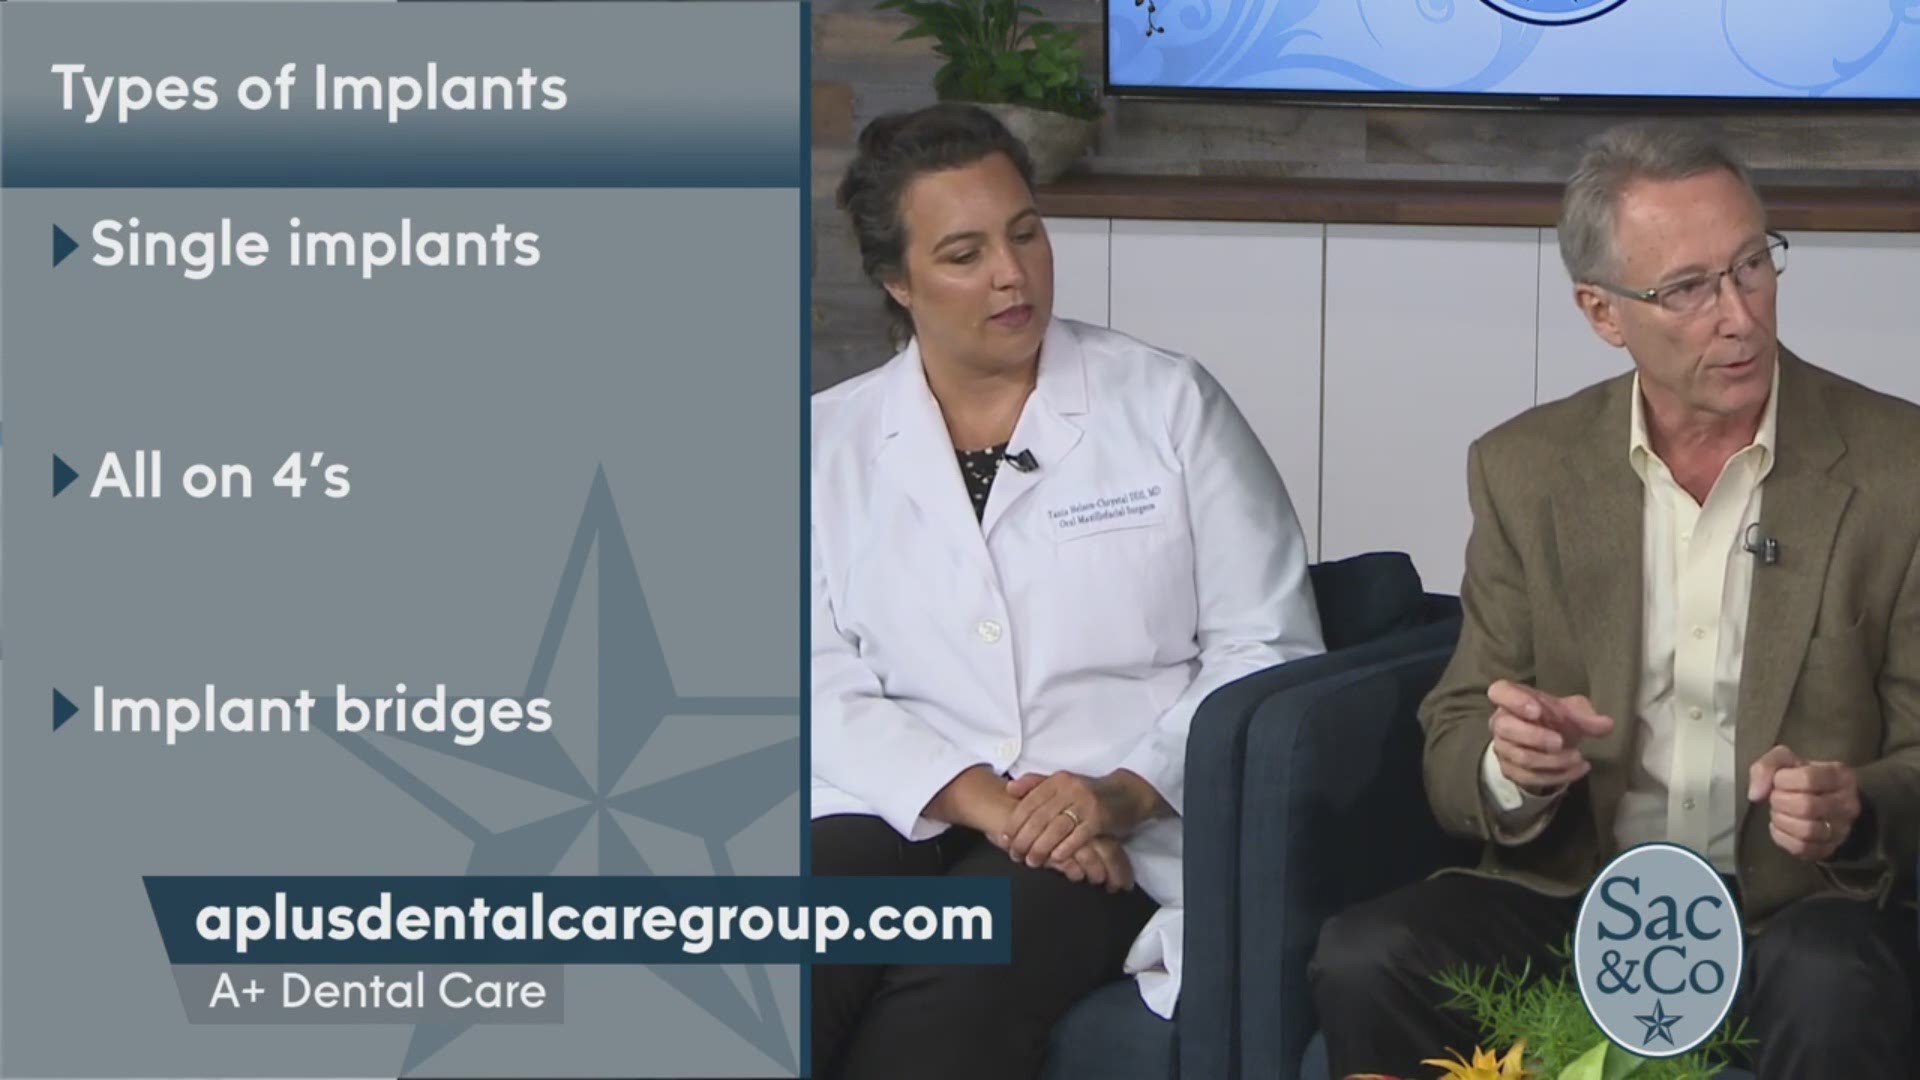 Mellisa Paul chats with A+ Dental’s Tim Herman about how implants may be what you need to feel confident in your smile. The following is a paid segment sponsored by A+ Dental Care.